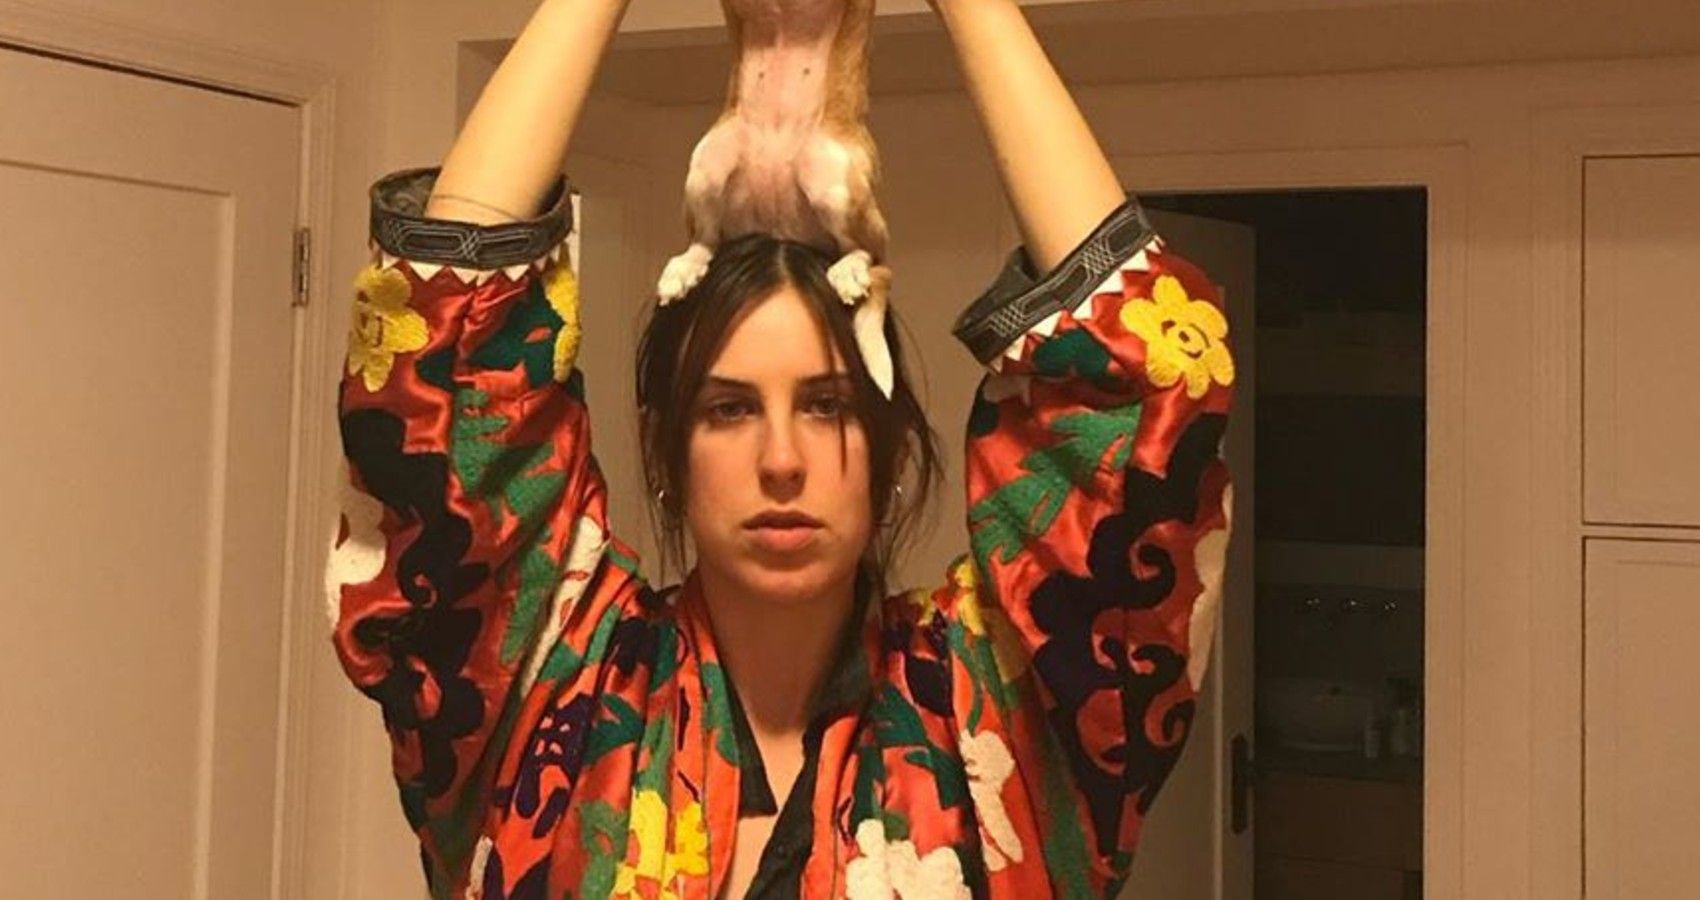 Tallulah Holding A Dog Above Her Head